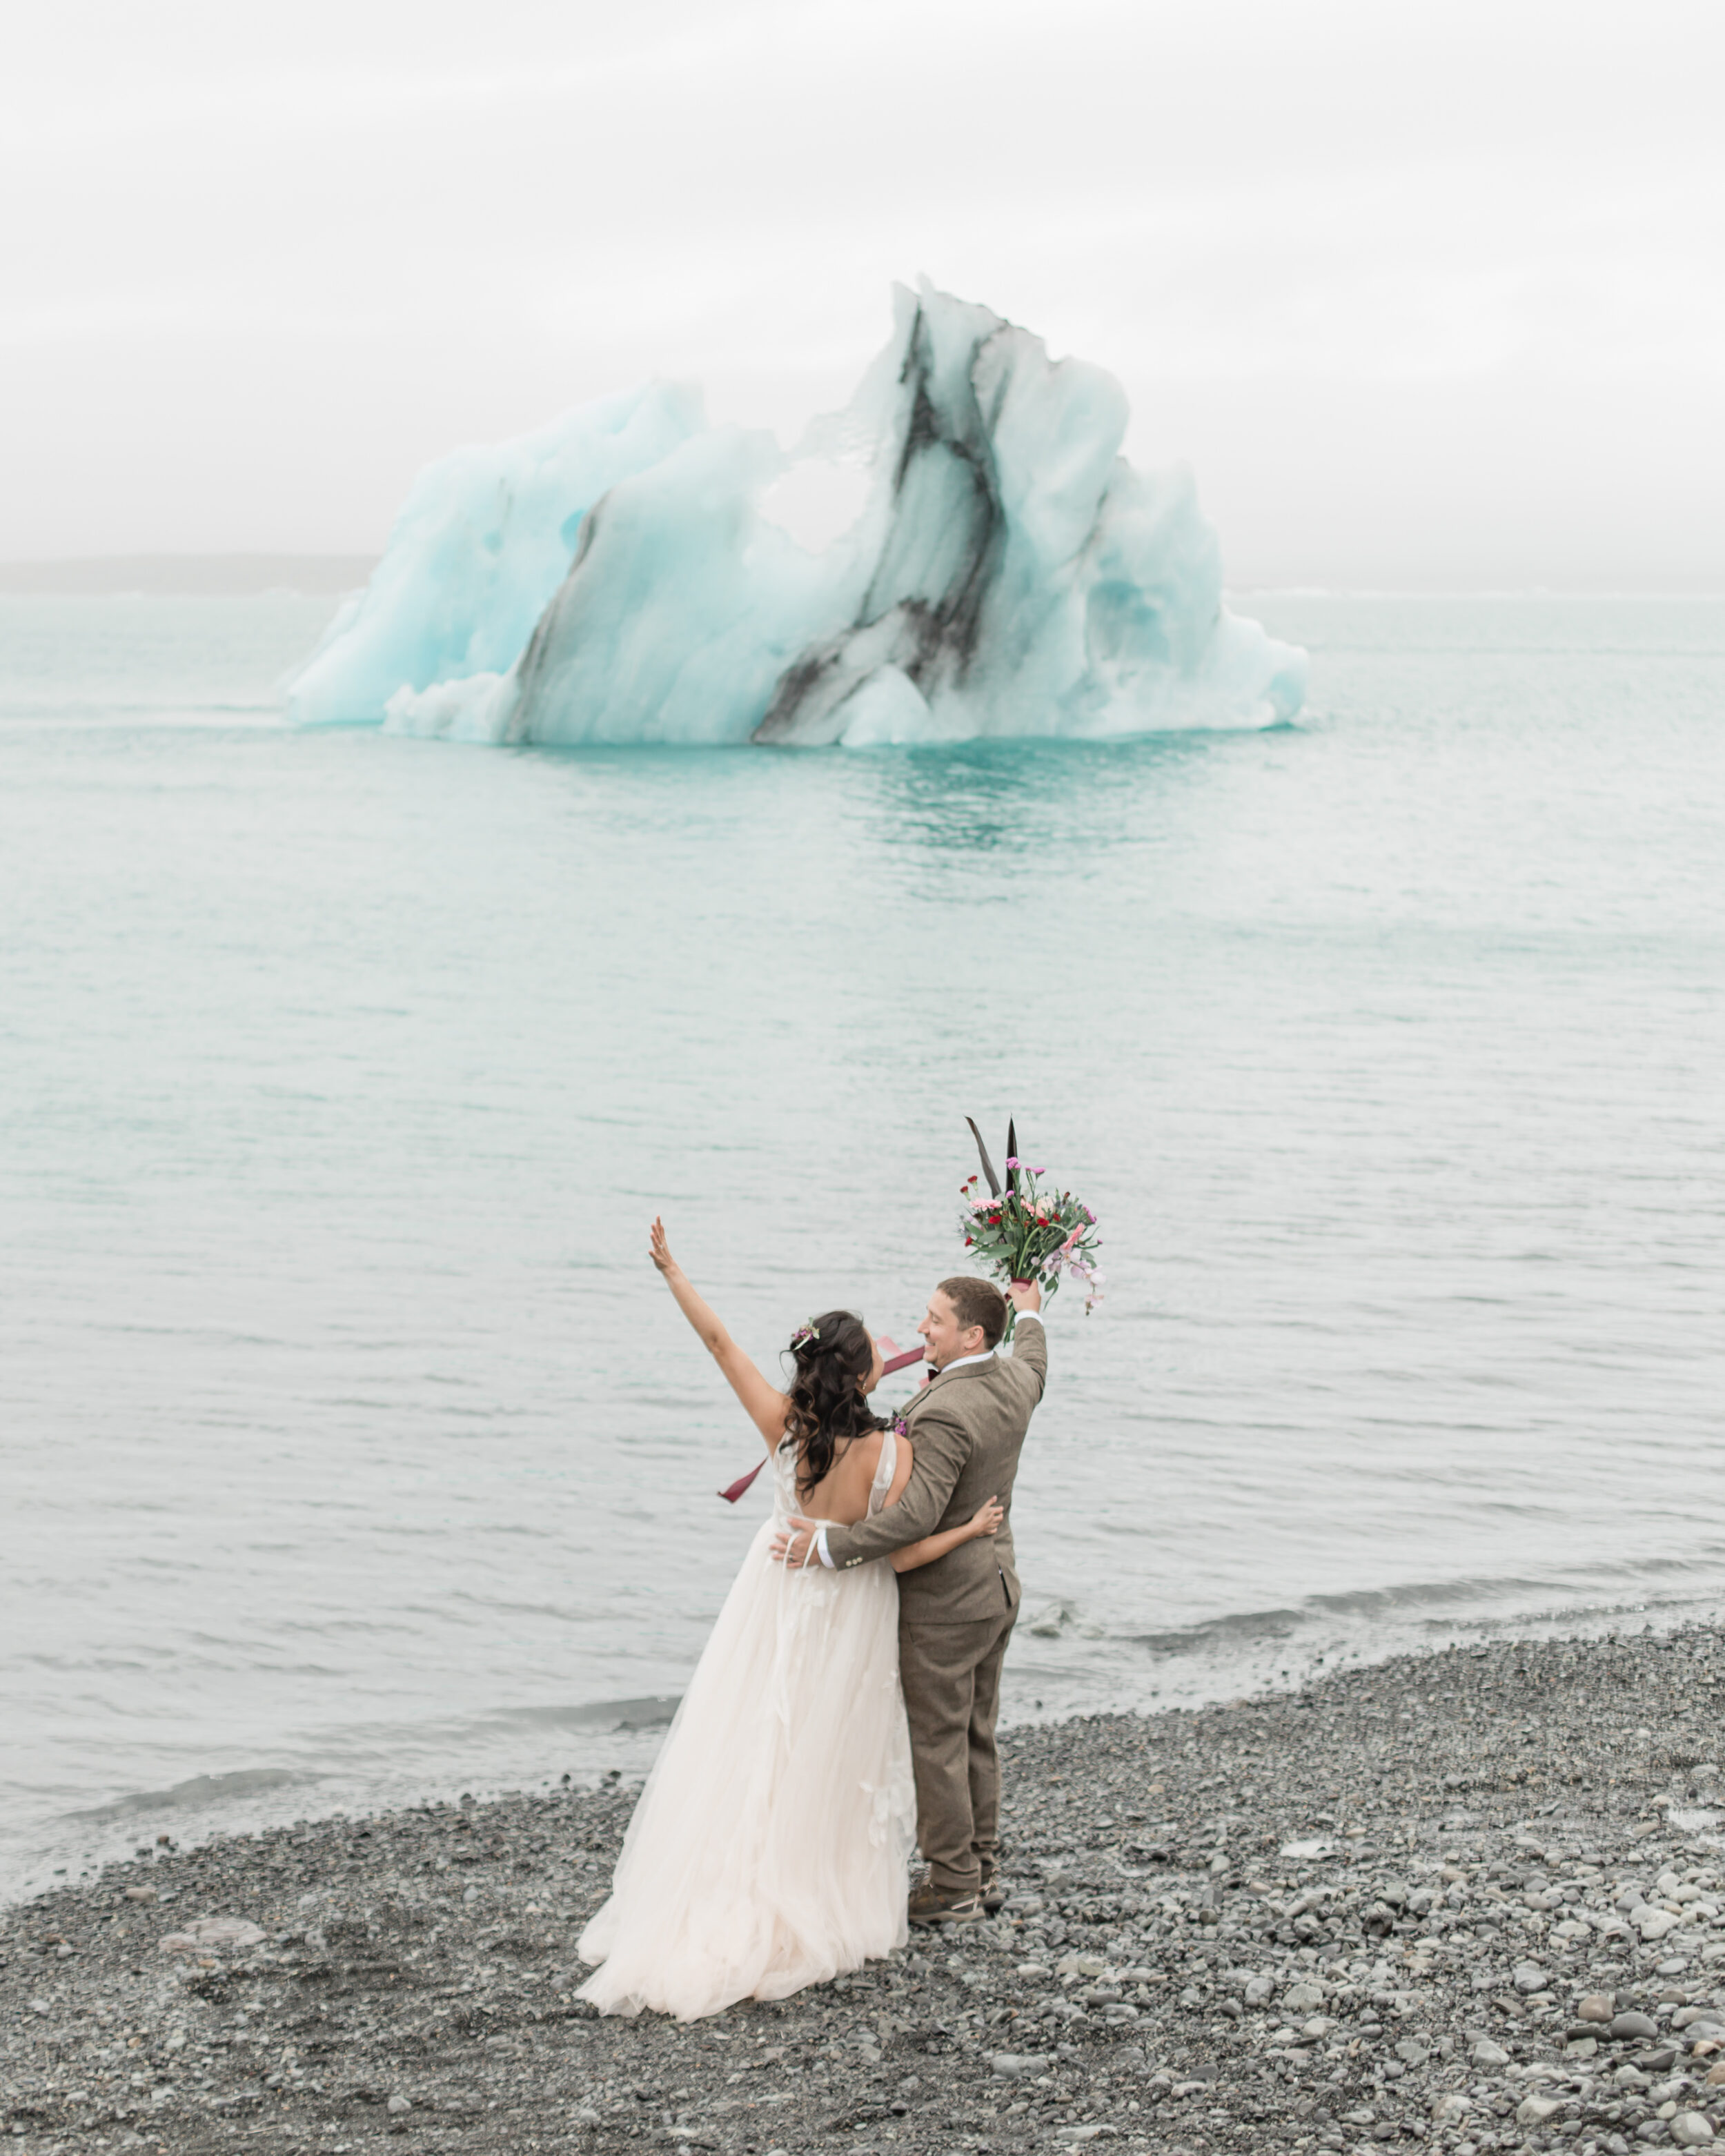 A couple cheers on a beach during their Iceland with an iceberg in the distance.